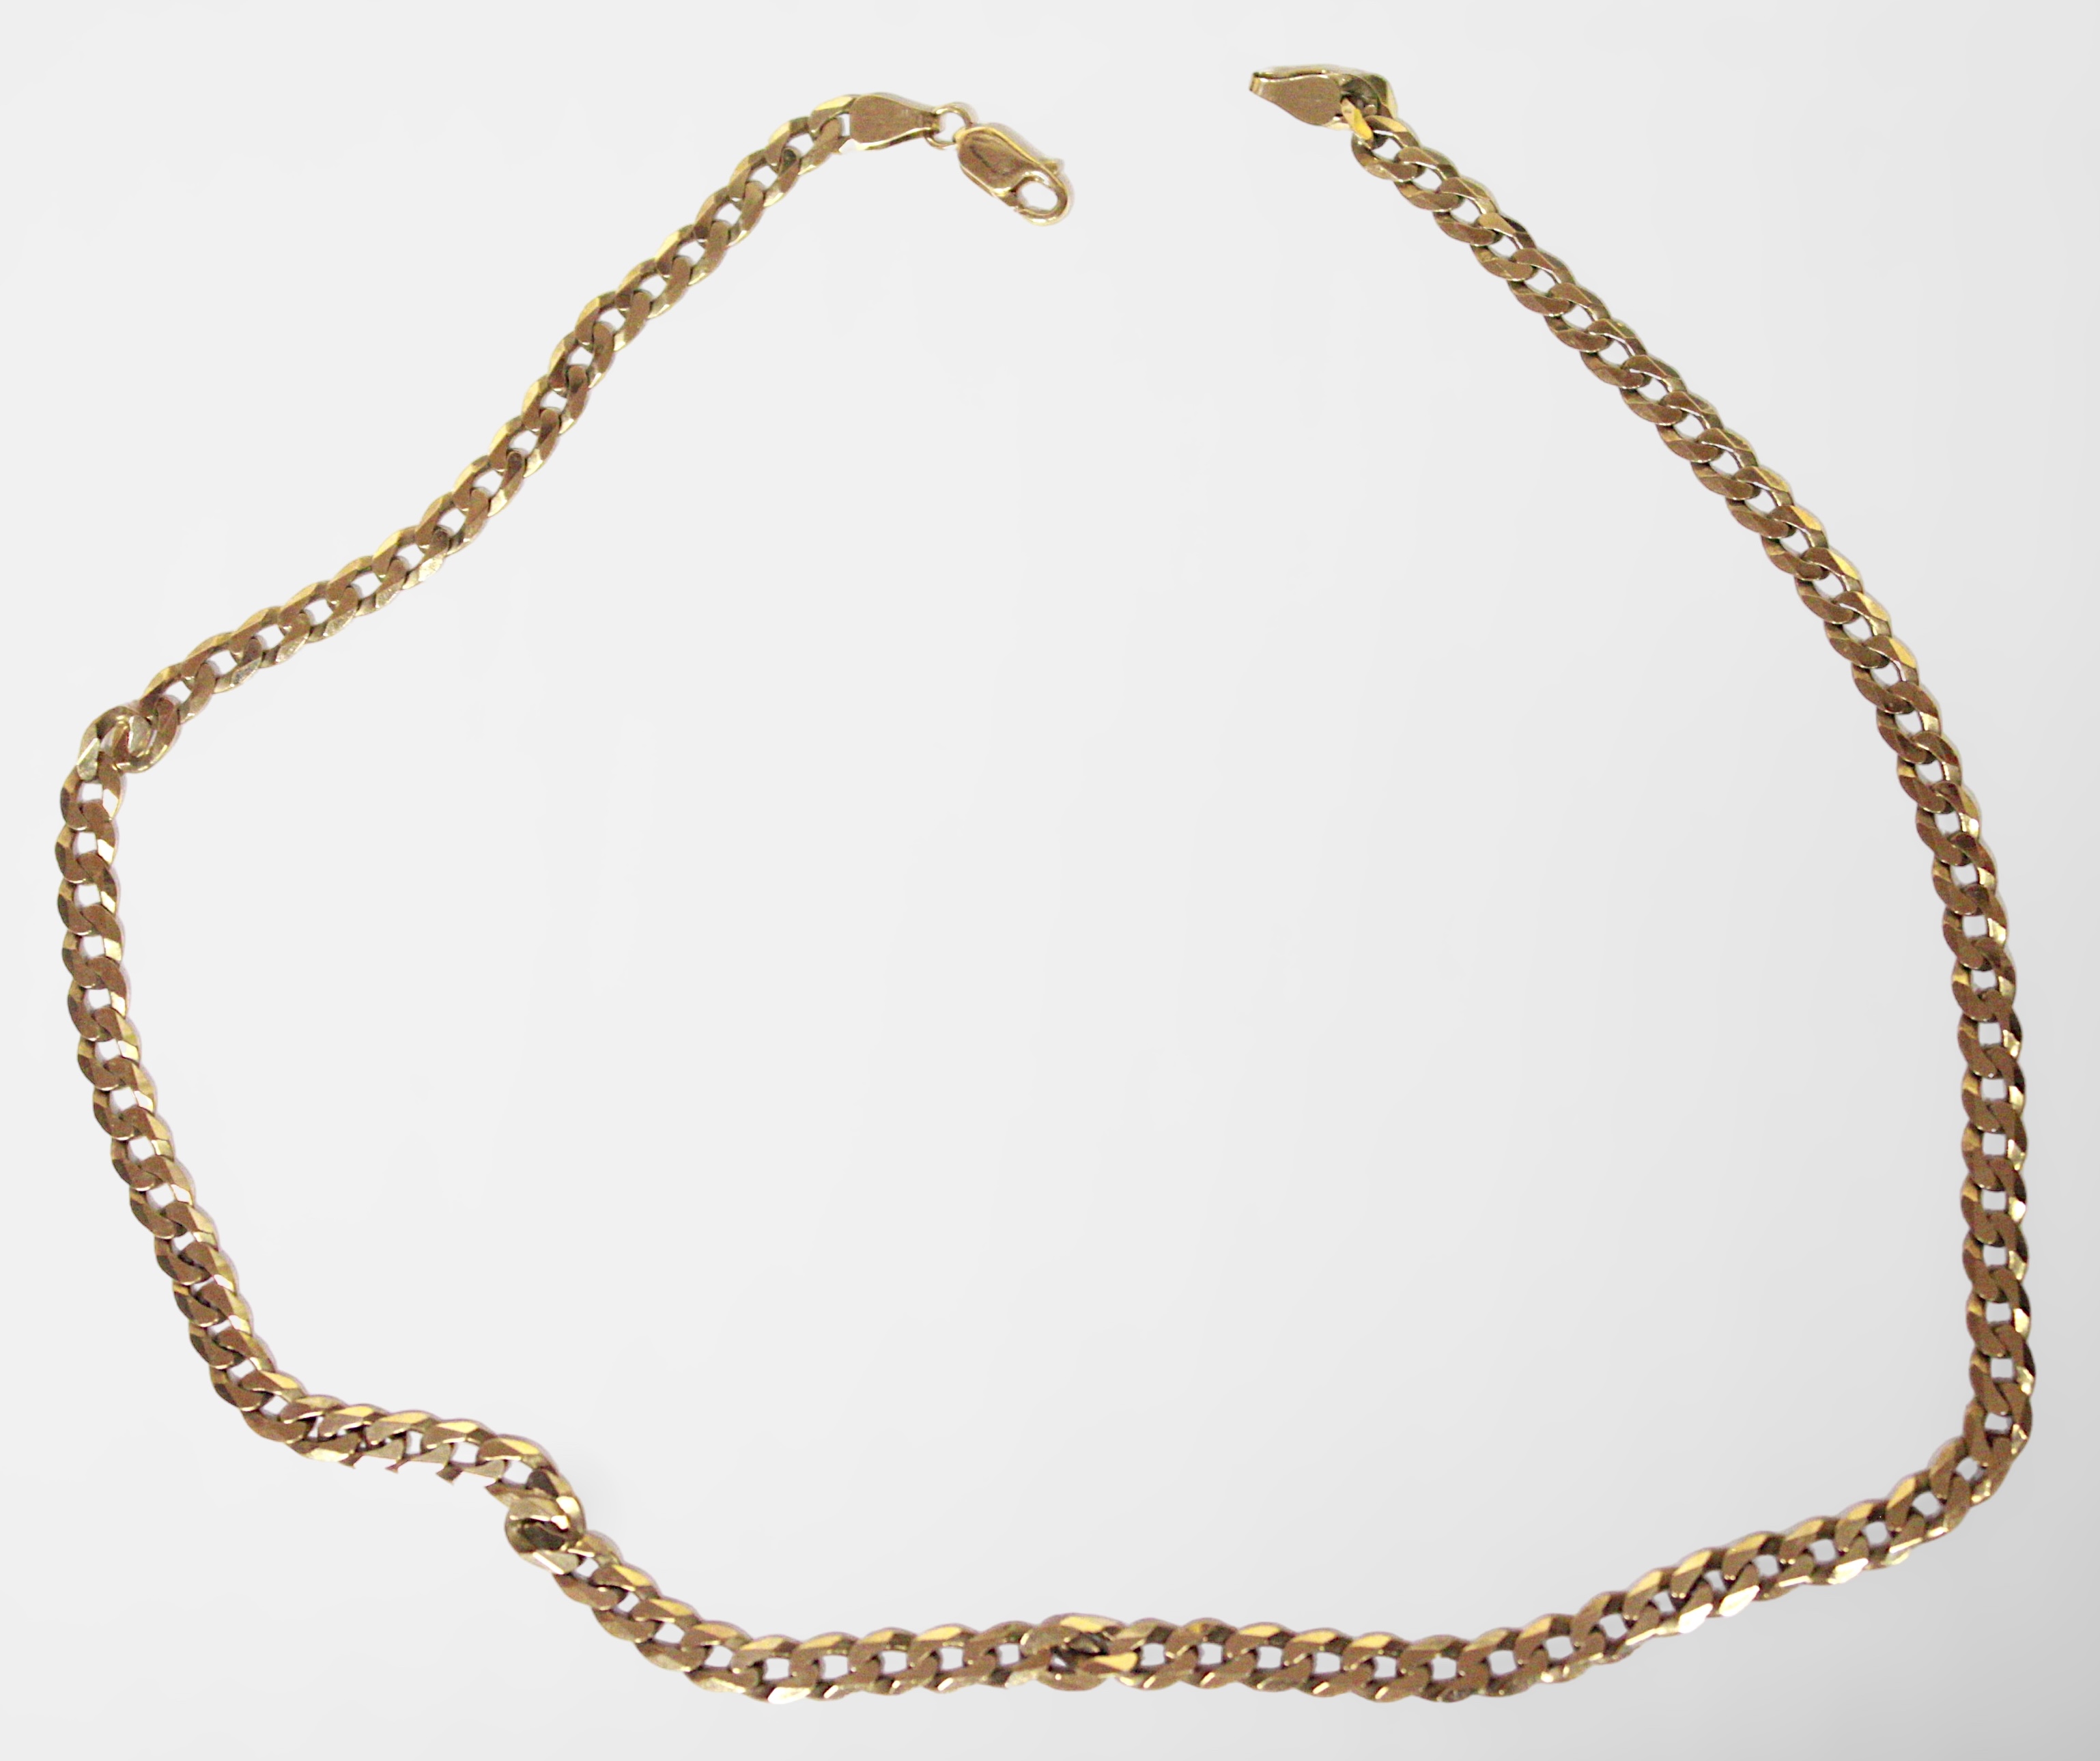 A 9ct yellow gold flat curb-link chain, hallmarked, weighs 44.7 grams, measures 24 inches.